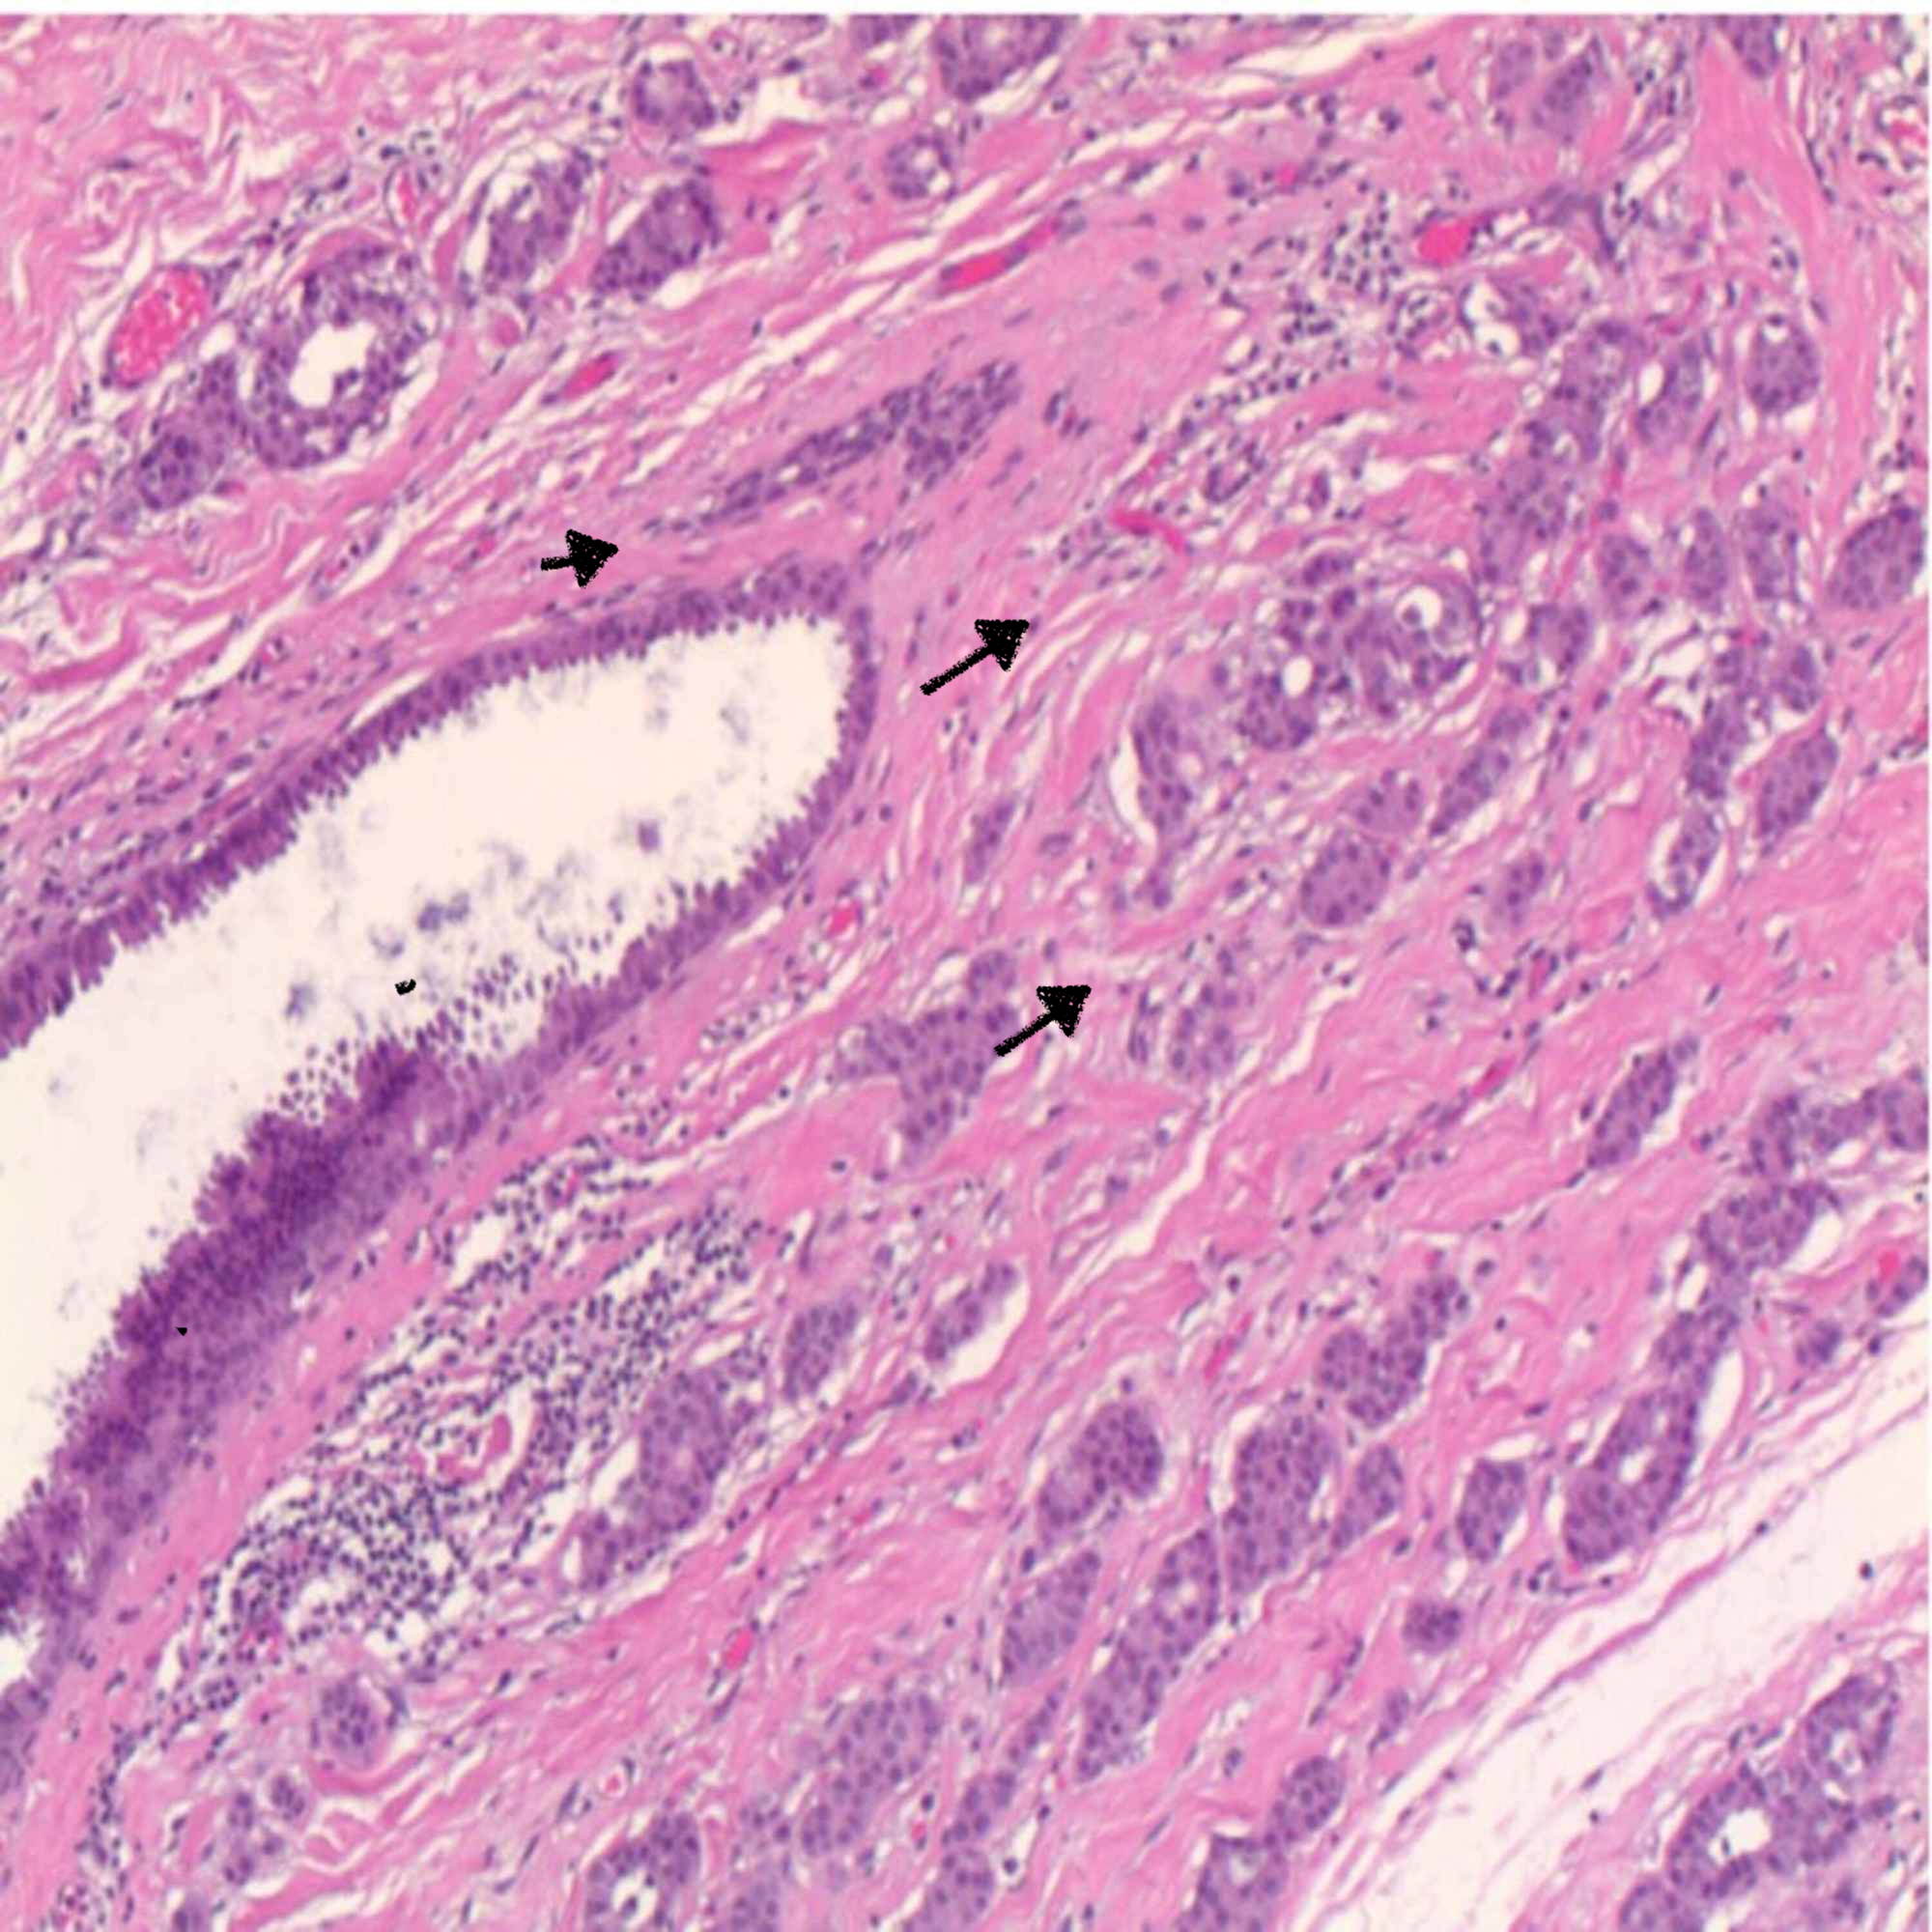 Cureus A Rare Presentation Of An Invasive Ductal Carcinoma Of Ectopic